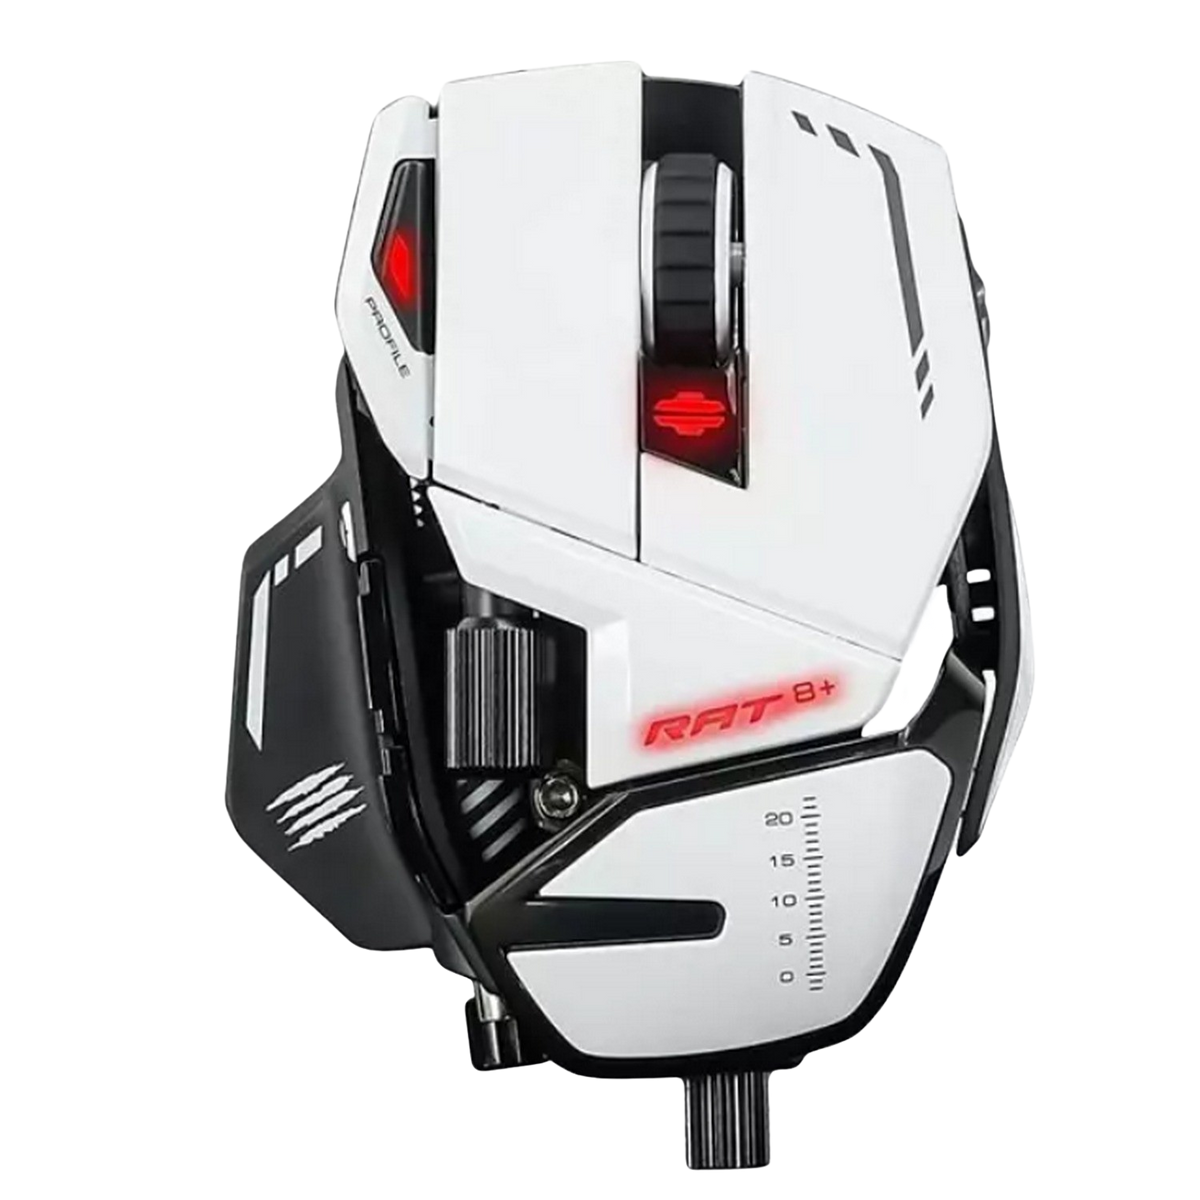 MAD CATZ Maus, R.A.T. Weiß GAMING Gaming WH MOUSE, 8+ OPTICAL MR05DCINWH000-0